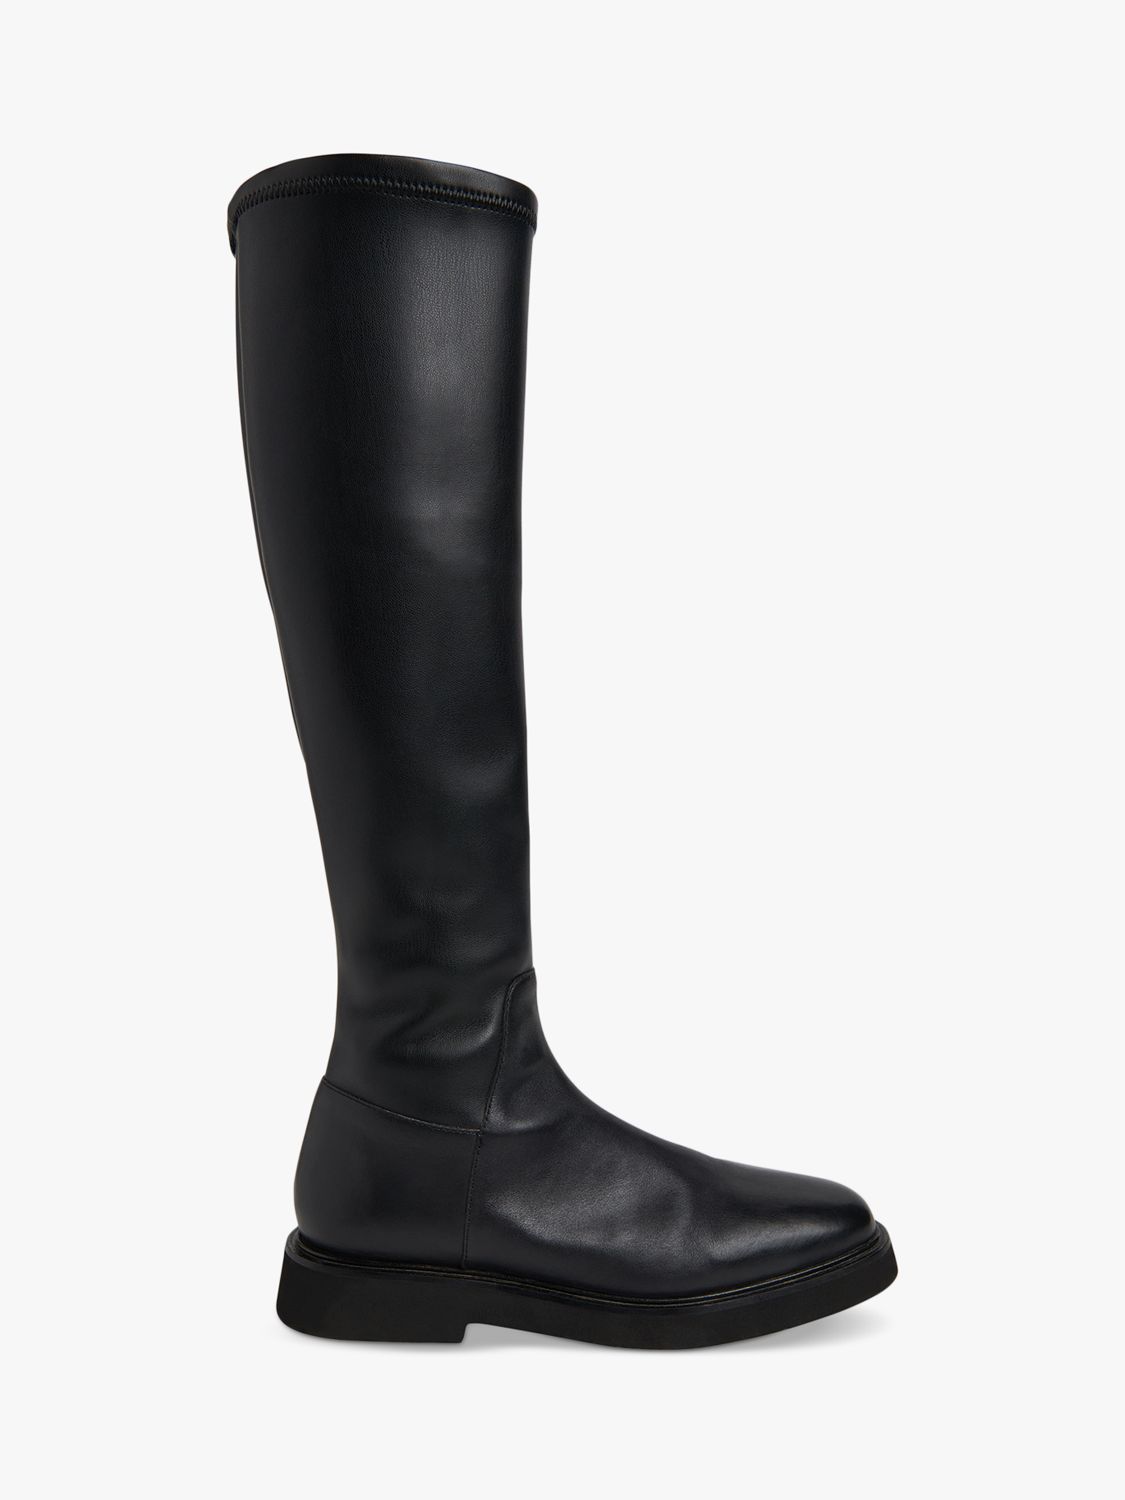 Whistles Quin Leather Stretch Knee High Boots, Black